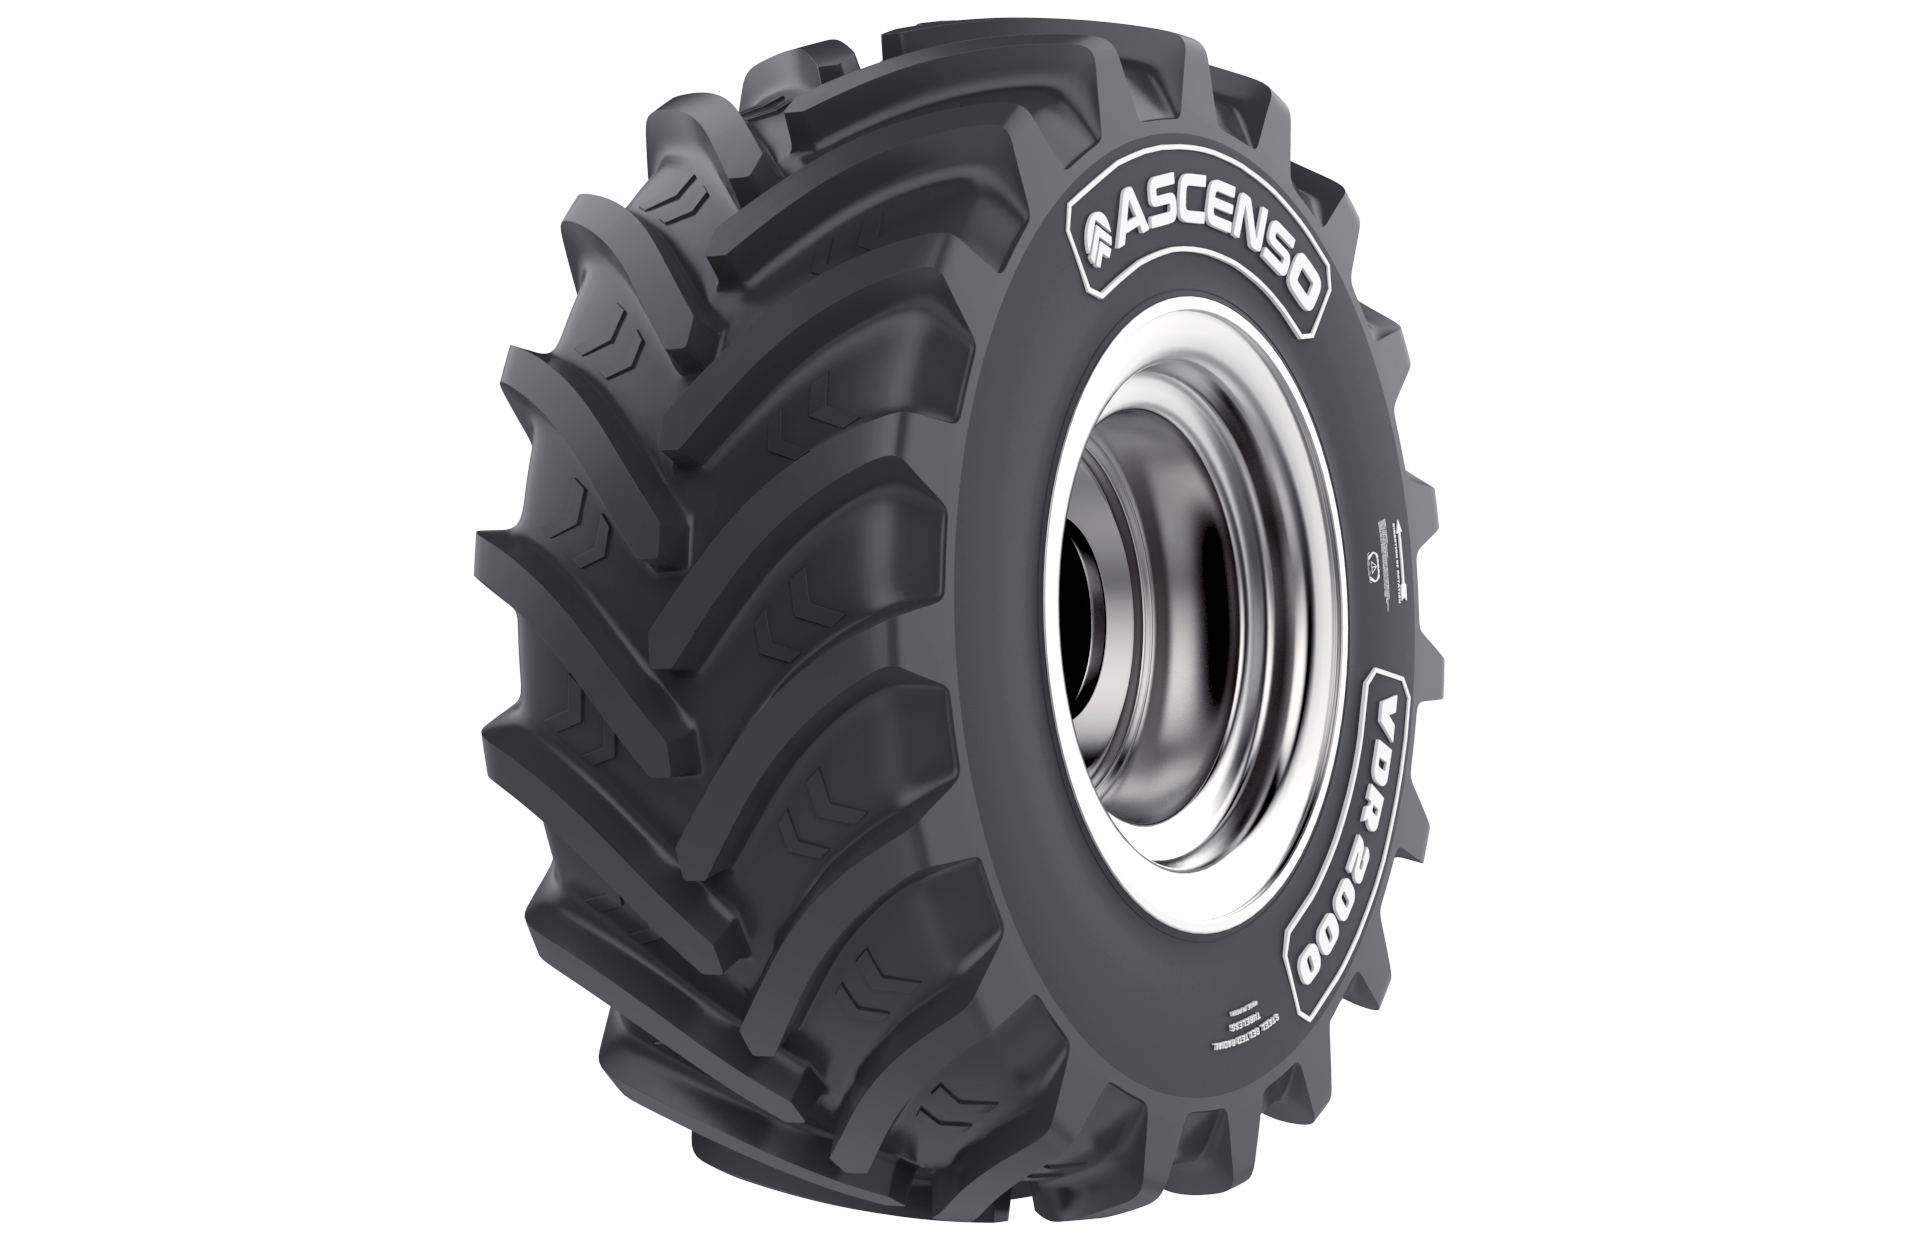 ASCENSO VF 600/70R30 NRO 170D R1-W TL VDR2000 STEEL BELTED